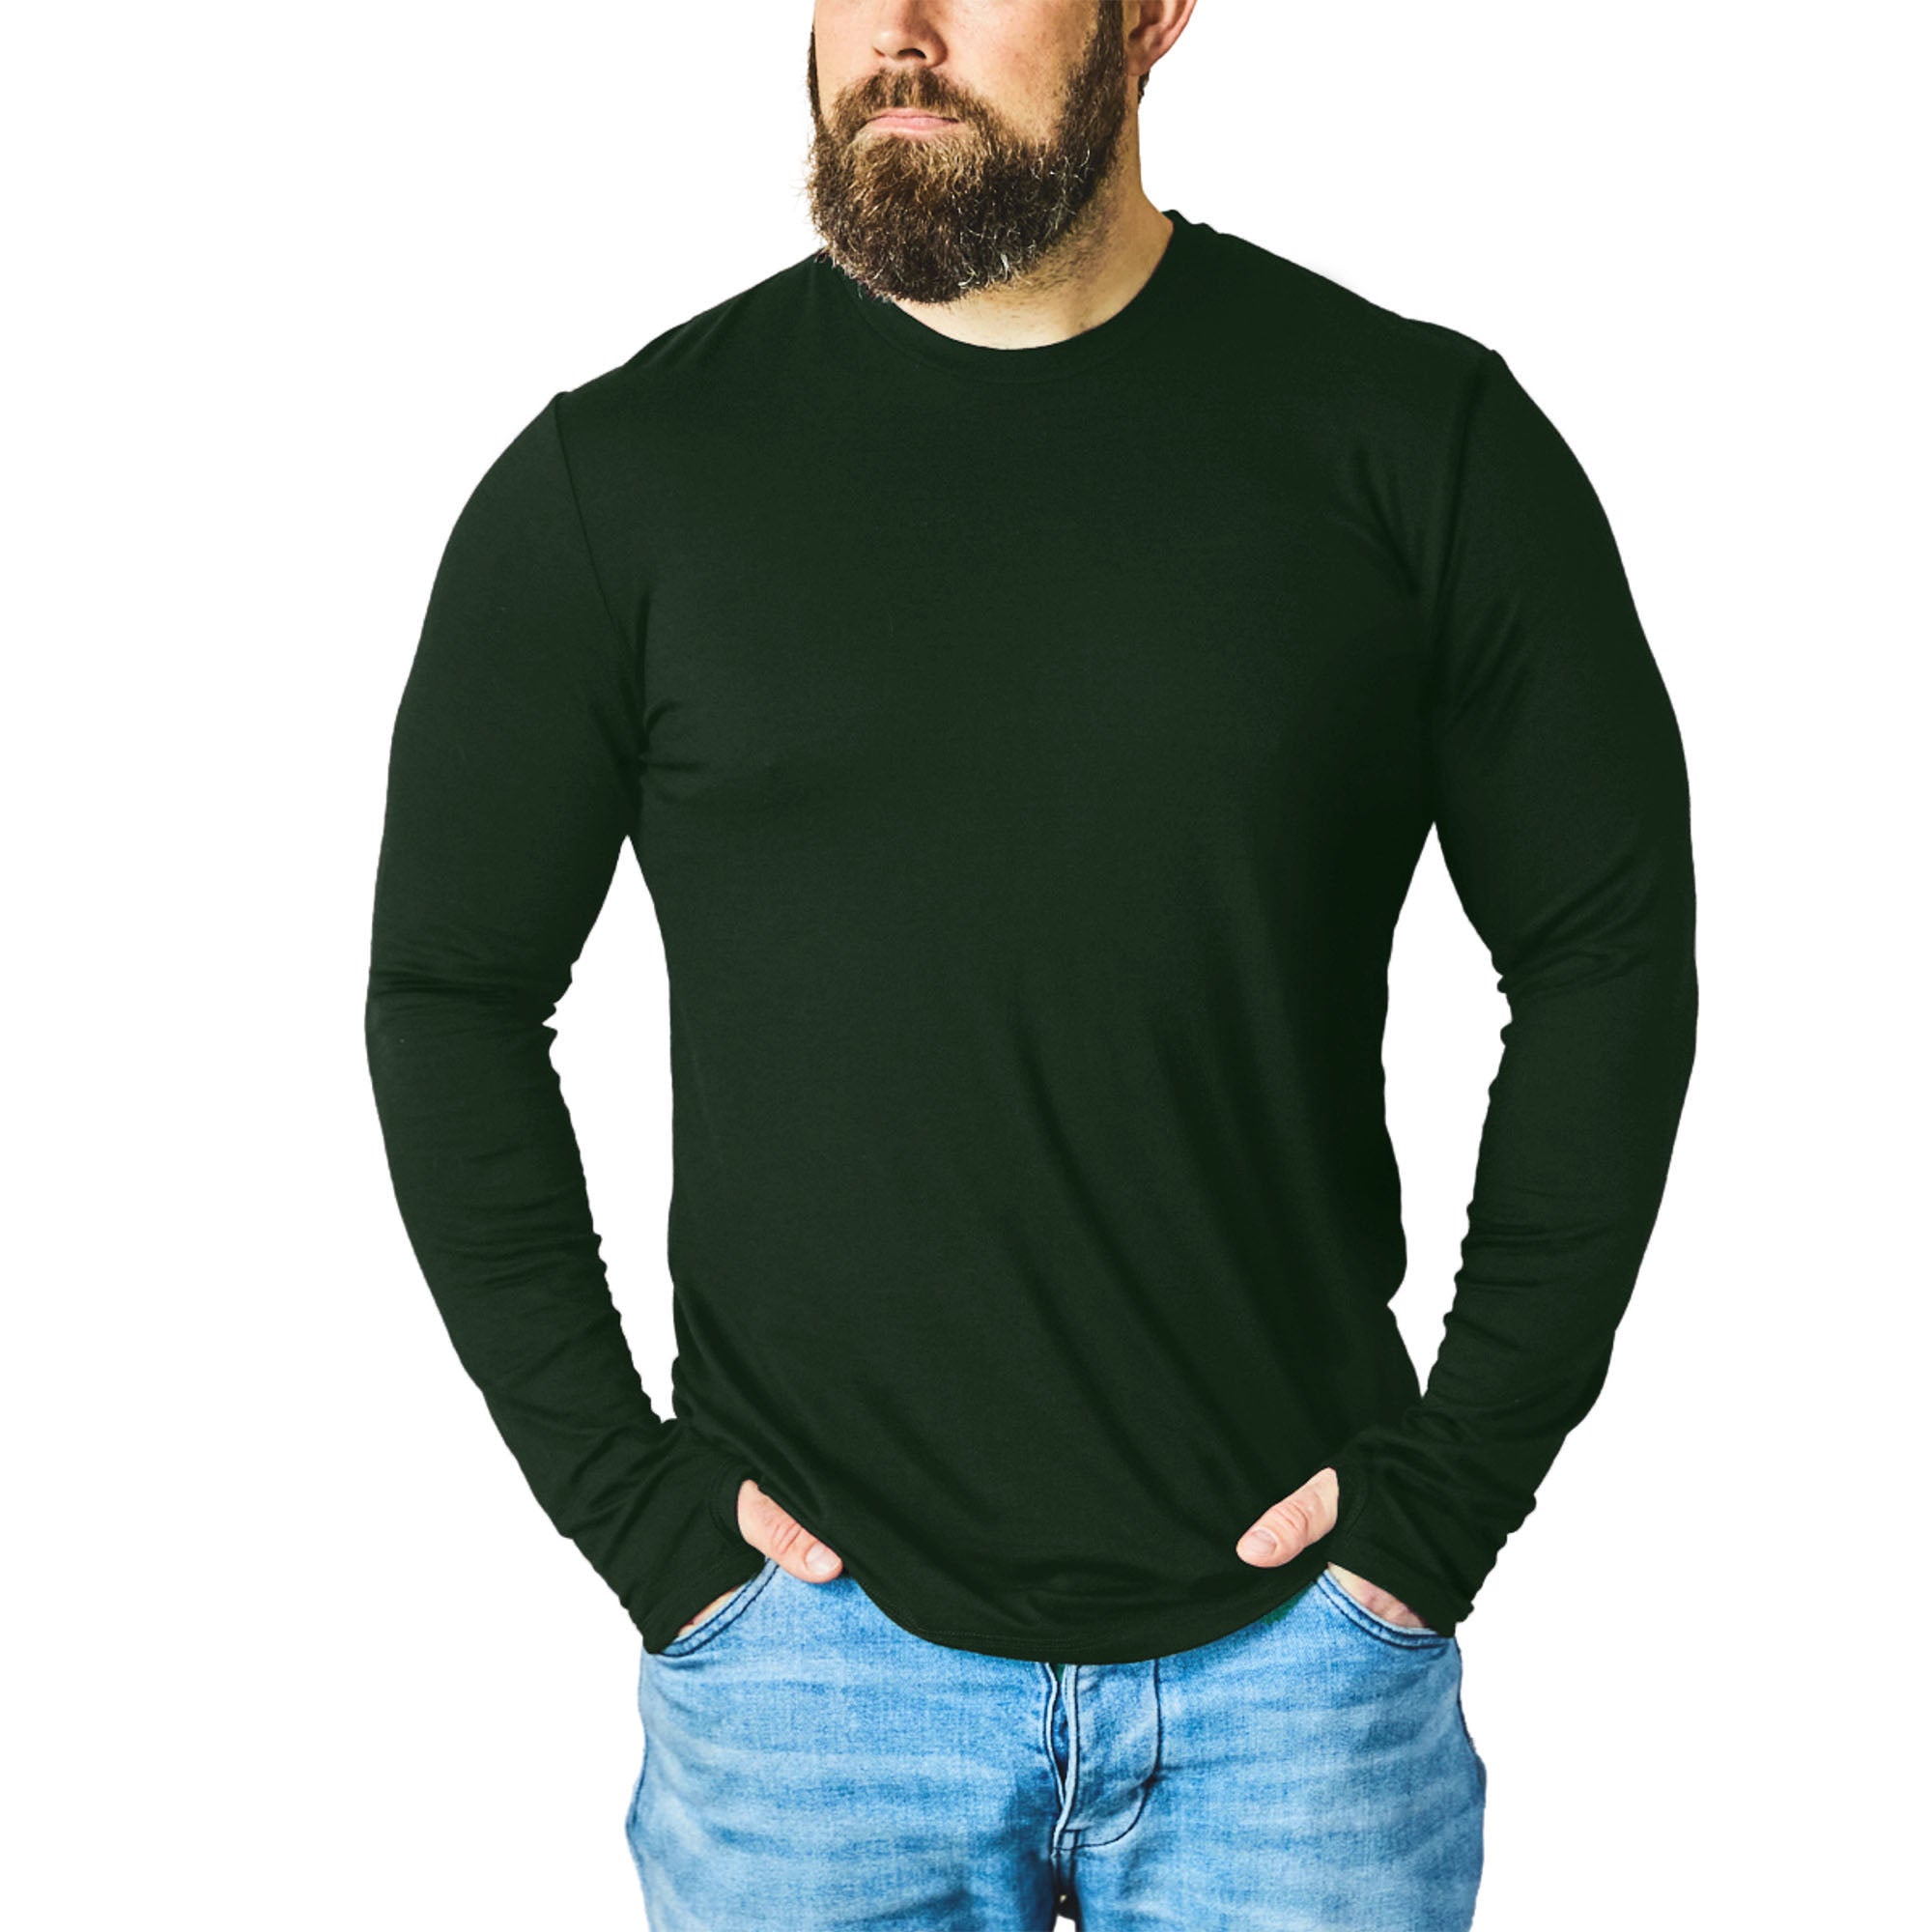 Merino 365 OG Long Sleeve with Thumbloops Top, Plantation